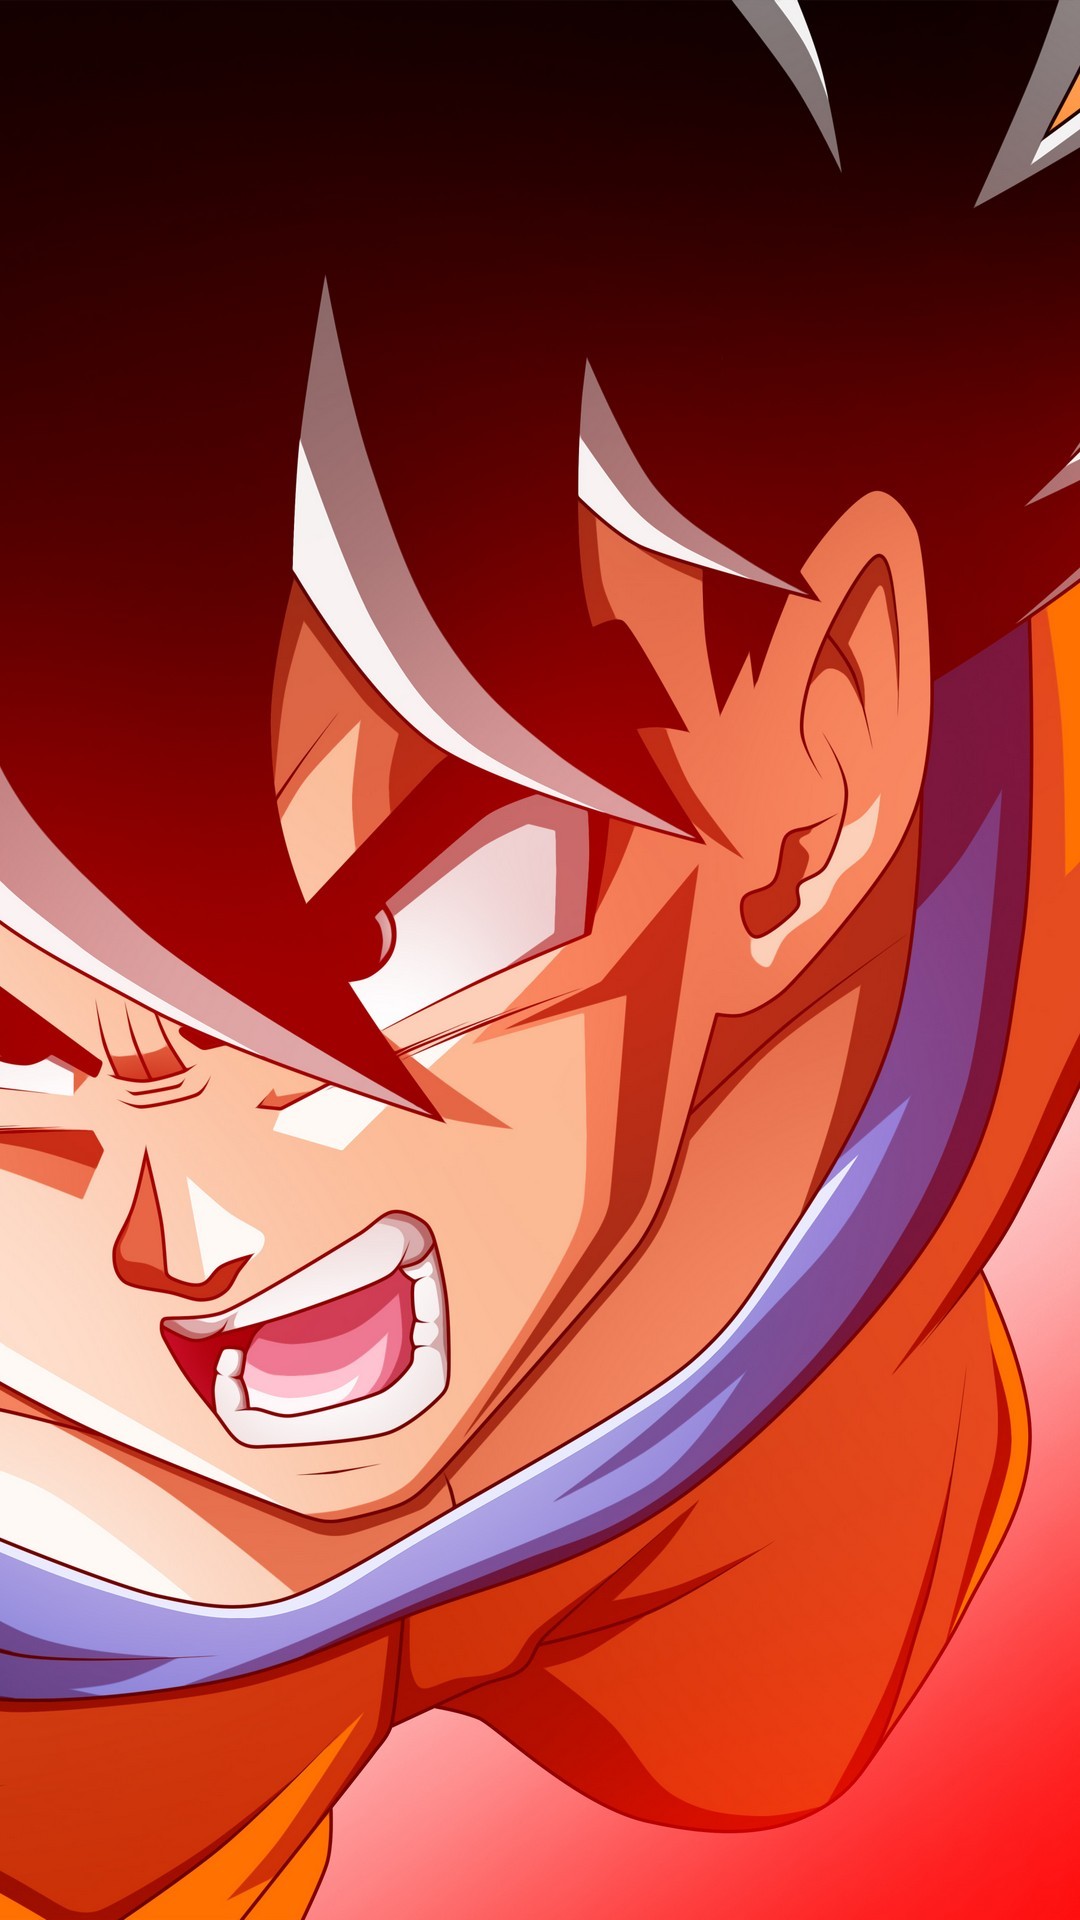 Goku Imagenes Wallpaper Android with HD resolution 1080x1920